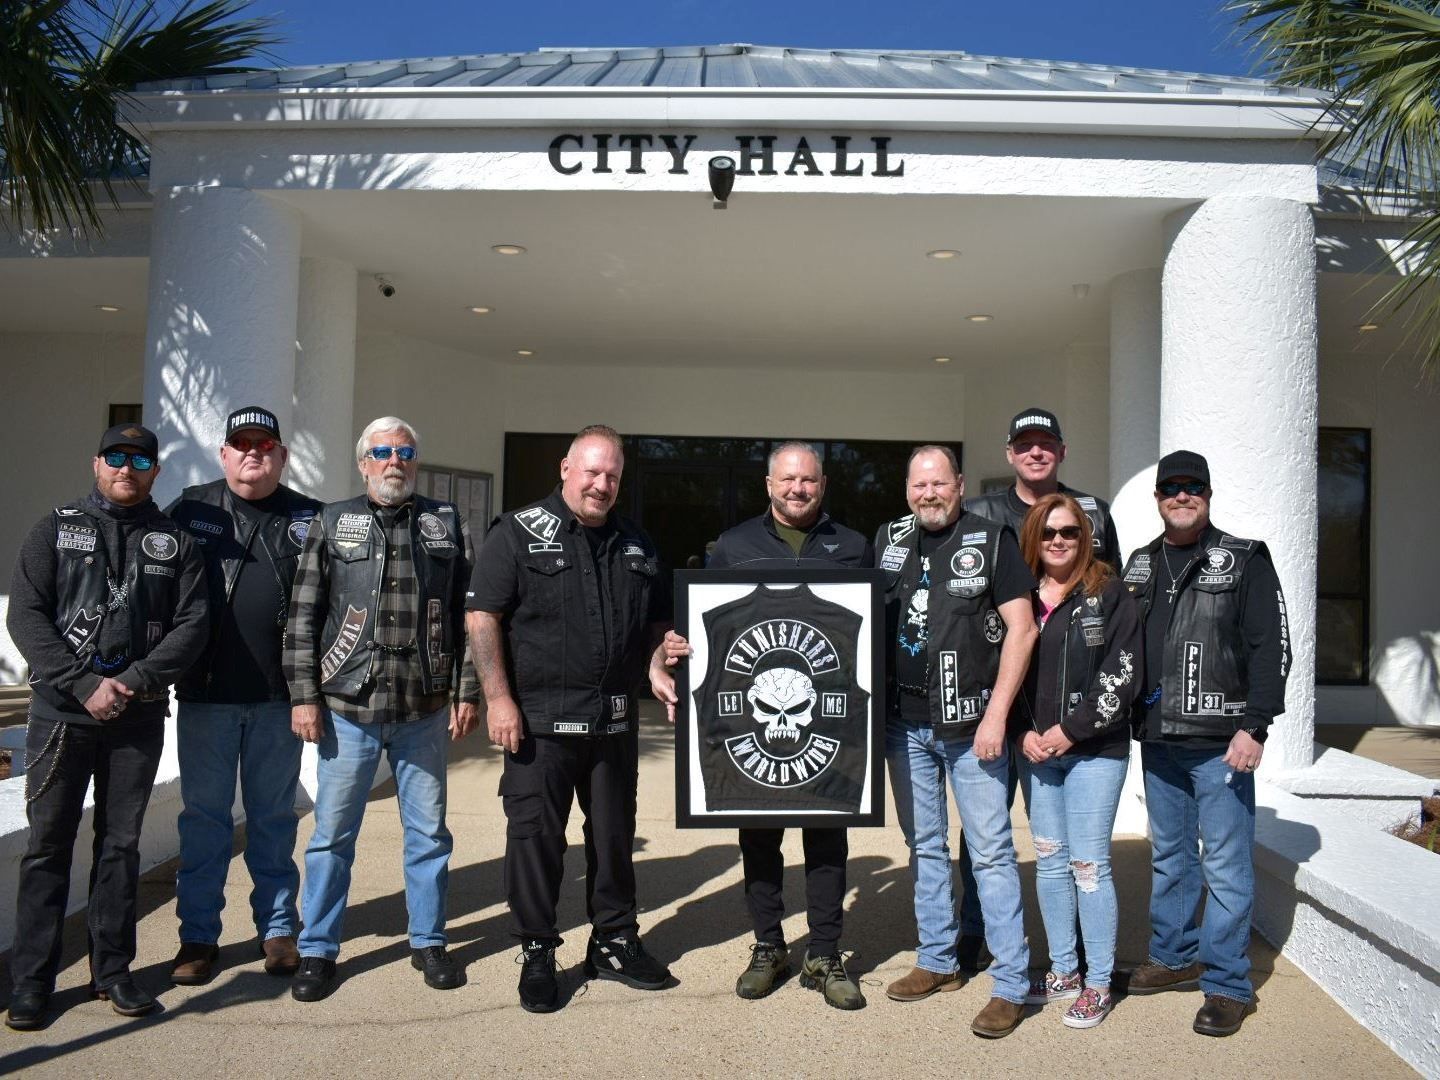 Punishers LEMC: 'In Service to Others' Motto Reflects in Charity Work and Community Appreciation